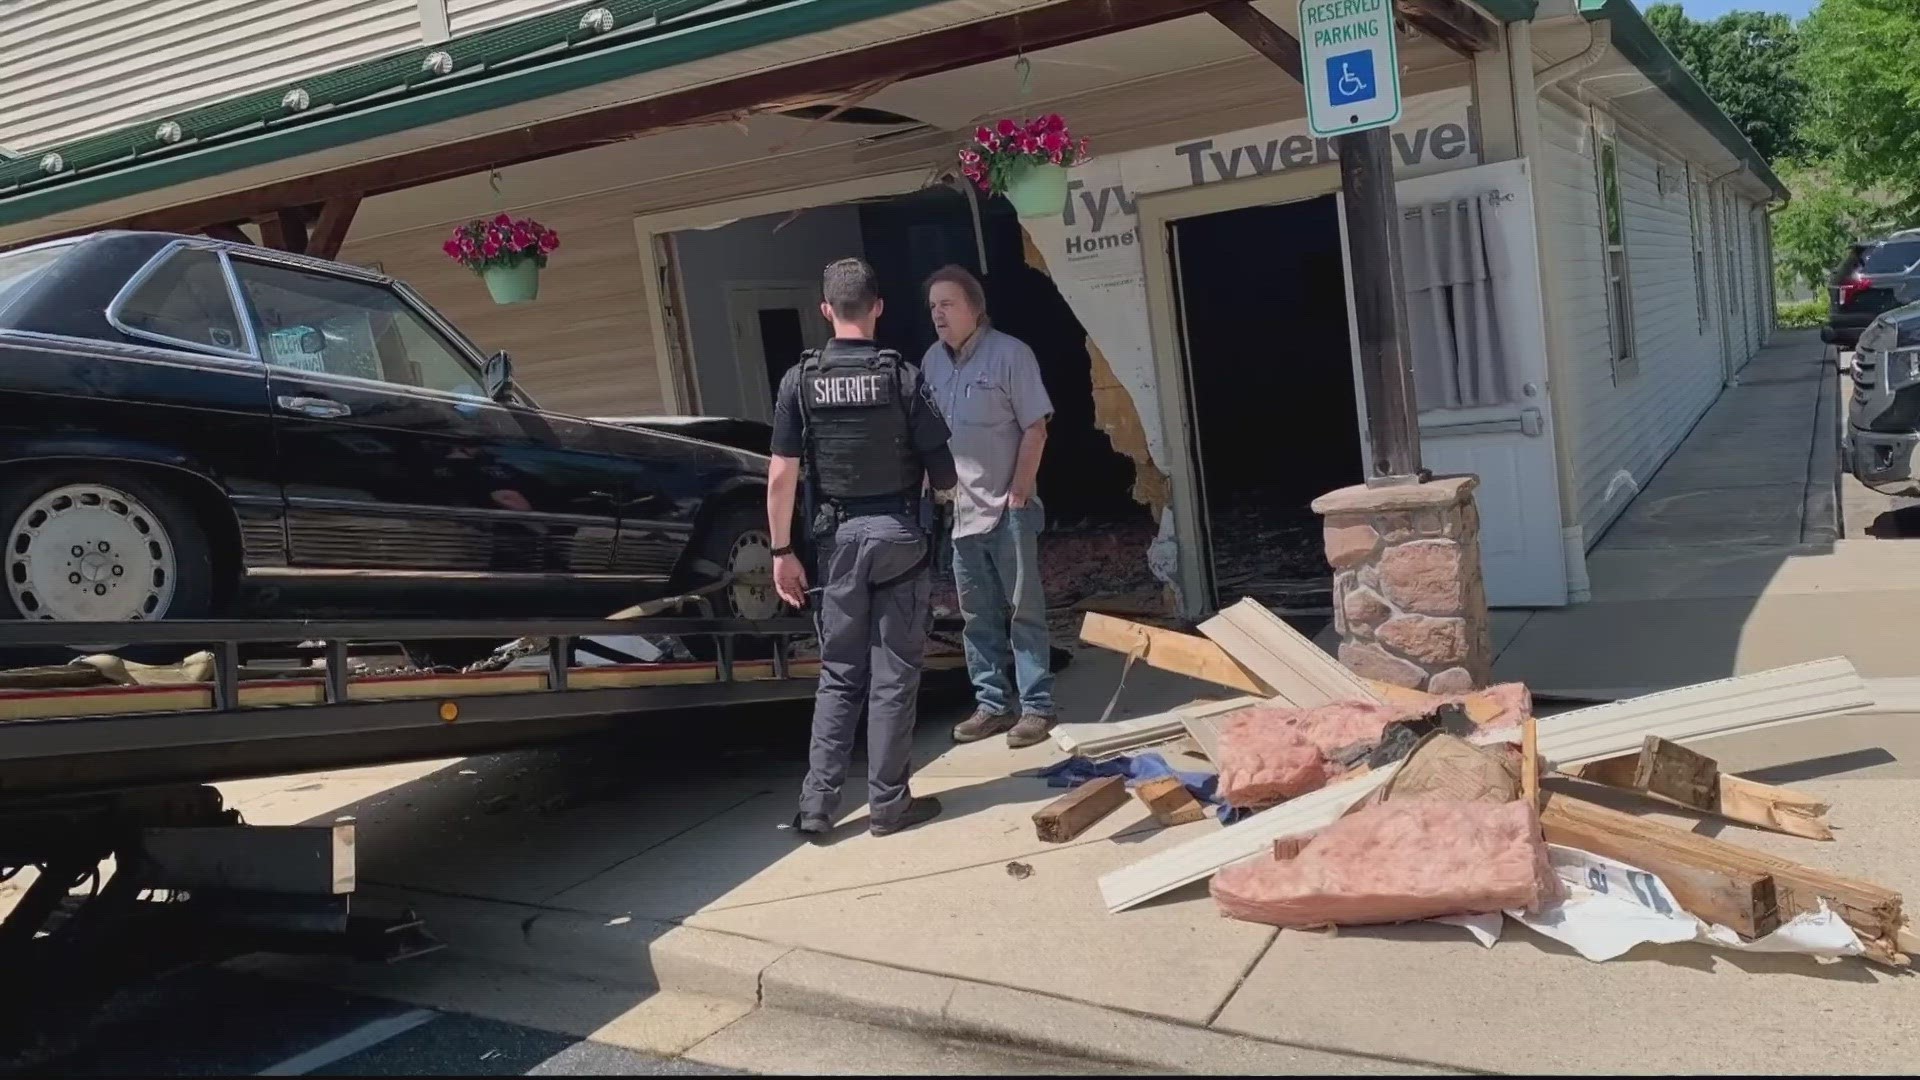 Parishioners say it's a miracle that no one was killed when a car barrelled into the middle of the Calvert County Baptist Church right after services on Sunday.